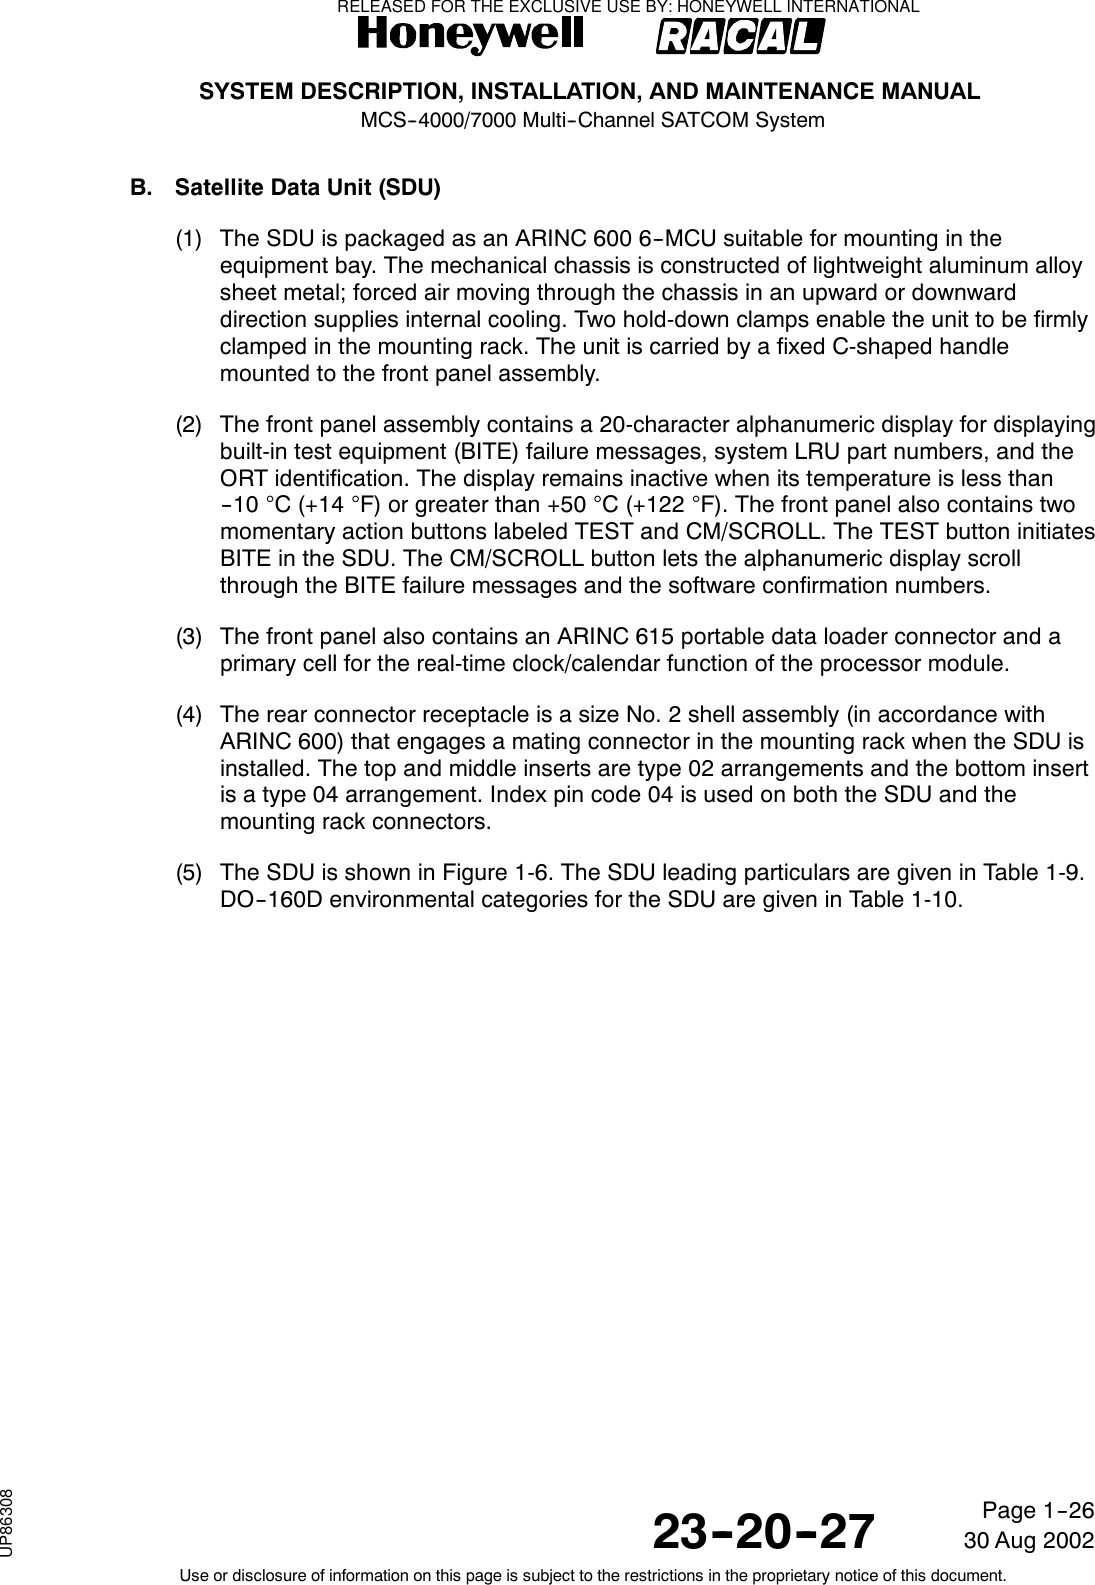 SYSTEM DESCRIPTION, INSTALLATION, AND MAINTENANCE MANUALMCS--4000/7000 Multi--Channel SATCOM System23--20--2730 Aug 2002Use or disclosure of information on this page is subject to the restrictions in the proprietary notice of this document.Page 1--26B. Satellite Data Unit (SDU)(1) The SDU is packaged as an ARINC 600 6--MCU suitable for mounting in theequipment bay. The mechanical chassis is constructed of lightweight aluminum alloysheet metal; forced air moving through the chassis in an upward or downwarddirection supplies internal cooling. Two hold-down clamps enable the unit to be firmlyclamped in the mounting rack. The unit is carried by a fixed C-shaped handlemounted to the front panel assembly.(2) The front panel assembly contains a 20-character alphanumeric display for displayingbuilt-in test equipment (BITE) failure messages, system LRU part numbers, and theORT identification. The display remains inactive when its temperature is less than-- 1 0 °C(+14°F) or greater than +50 °C(+122°F). The front panel also contains twomomentary action buttons labeled TEST and CM/SCROLL. The TEST button initiatesBITE in the SDU. The CM/SCROLL button lets the alphanumeric display scrollthrough the BITE failure messages and the software confirmation numbers.(3) The front panel also contains an ARINC 615 portable data loader connector and aprimary cell for the real-time clock/calendar function of the processor module.(4) The rear connector receptacle is a size No. 2 shell assembly (in accordance withARINC 600) that engages a mating connector in the mounting rack when the SDU isinstalled. The top and middle inserts are type 02 arrangements and the bottom insertis a type 04 arrangement. Index pin code 04 is used on both the SDU and themounting rack connectors.(5) The SDU is shown in Figure 1-6. The SDU leading particulars are given in Table 1-9.DO--160D environmental categories for the SDU are given in Table 1-10.RELEASED FOR THE EXCLUSIVE USE BY: HONEYWELL INTERNATIONALUP86308